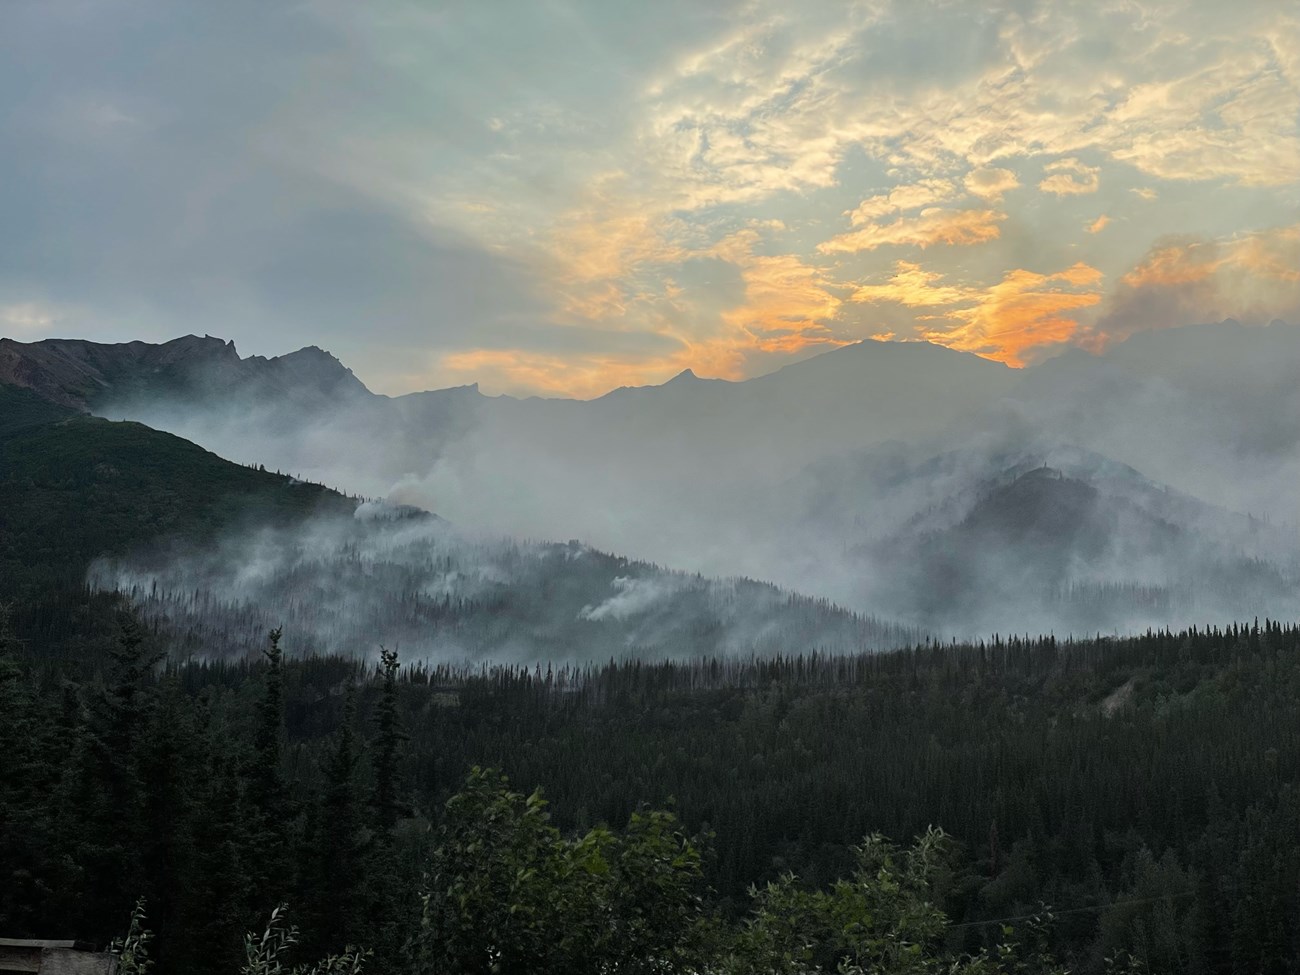 Smoke rises off of forested mountains while the sun sets in the sky